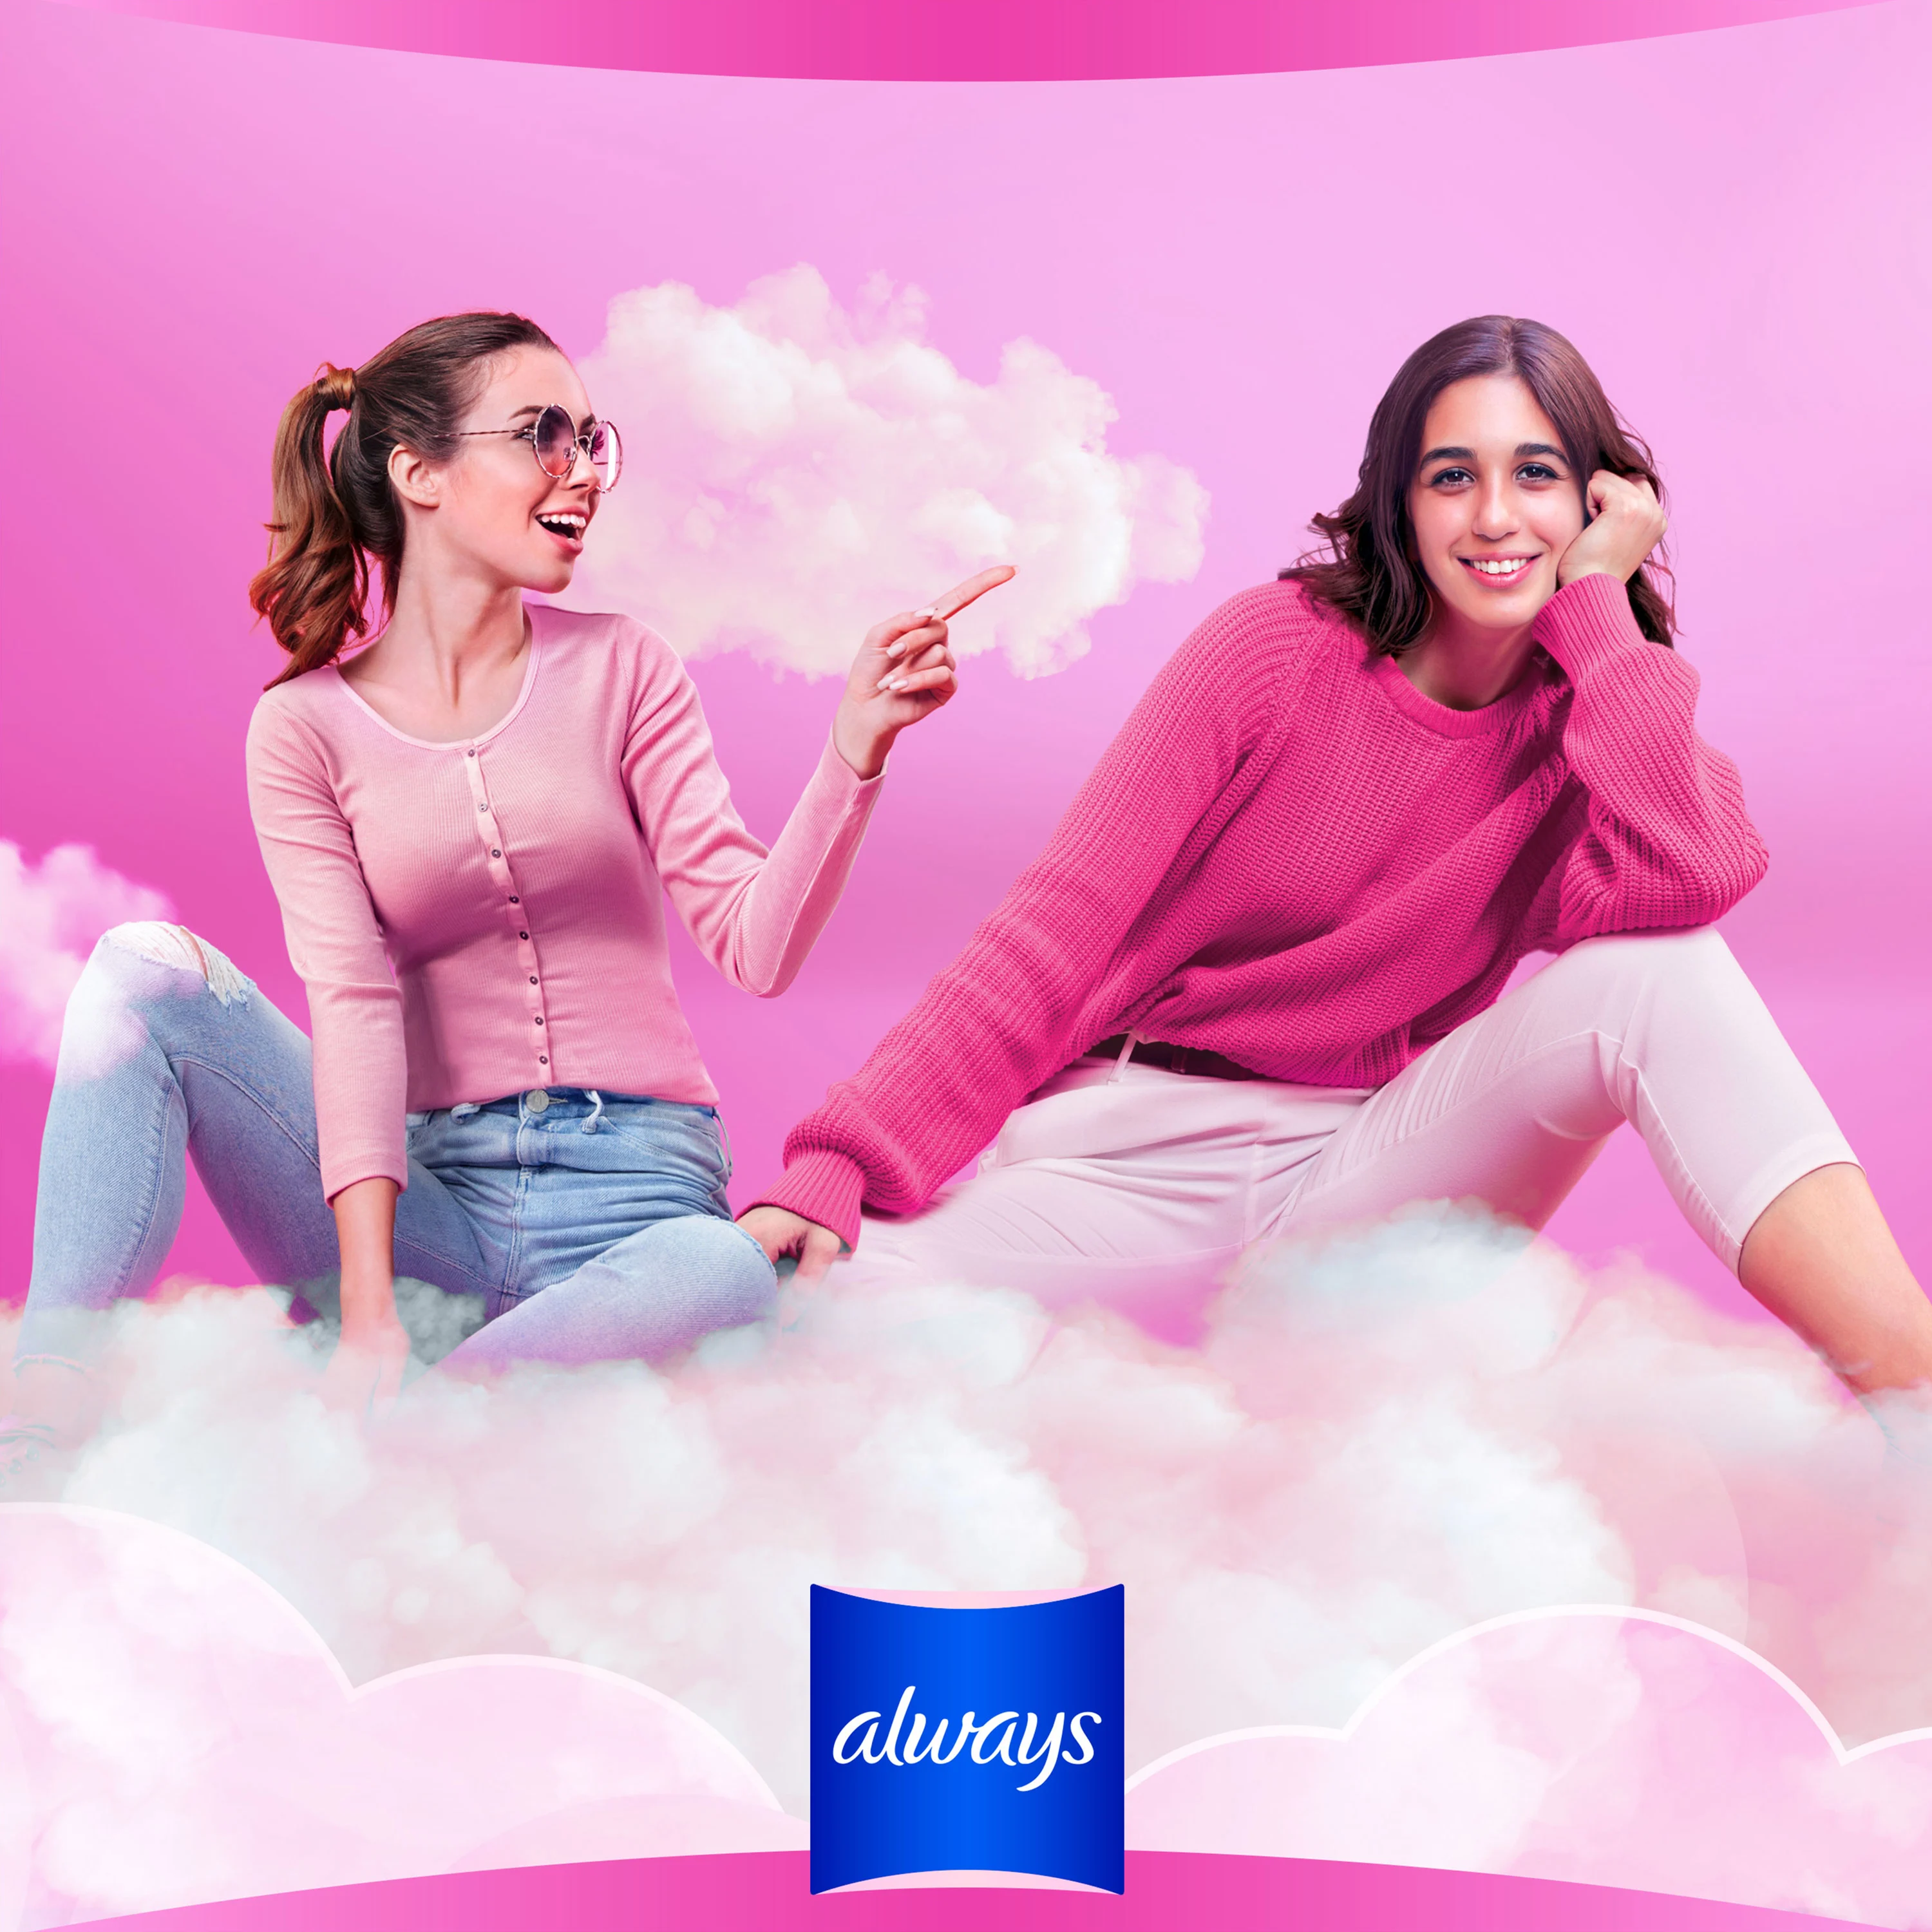 Always Sensitive Night Ultra (Size 3) Sanitary Towels With Wings Pack of 10  Pads